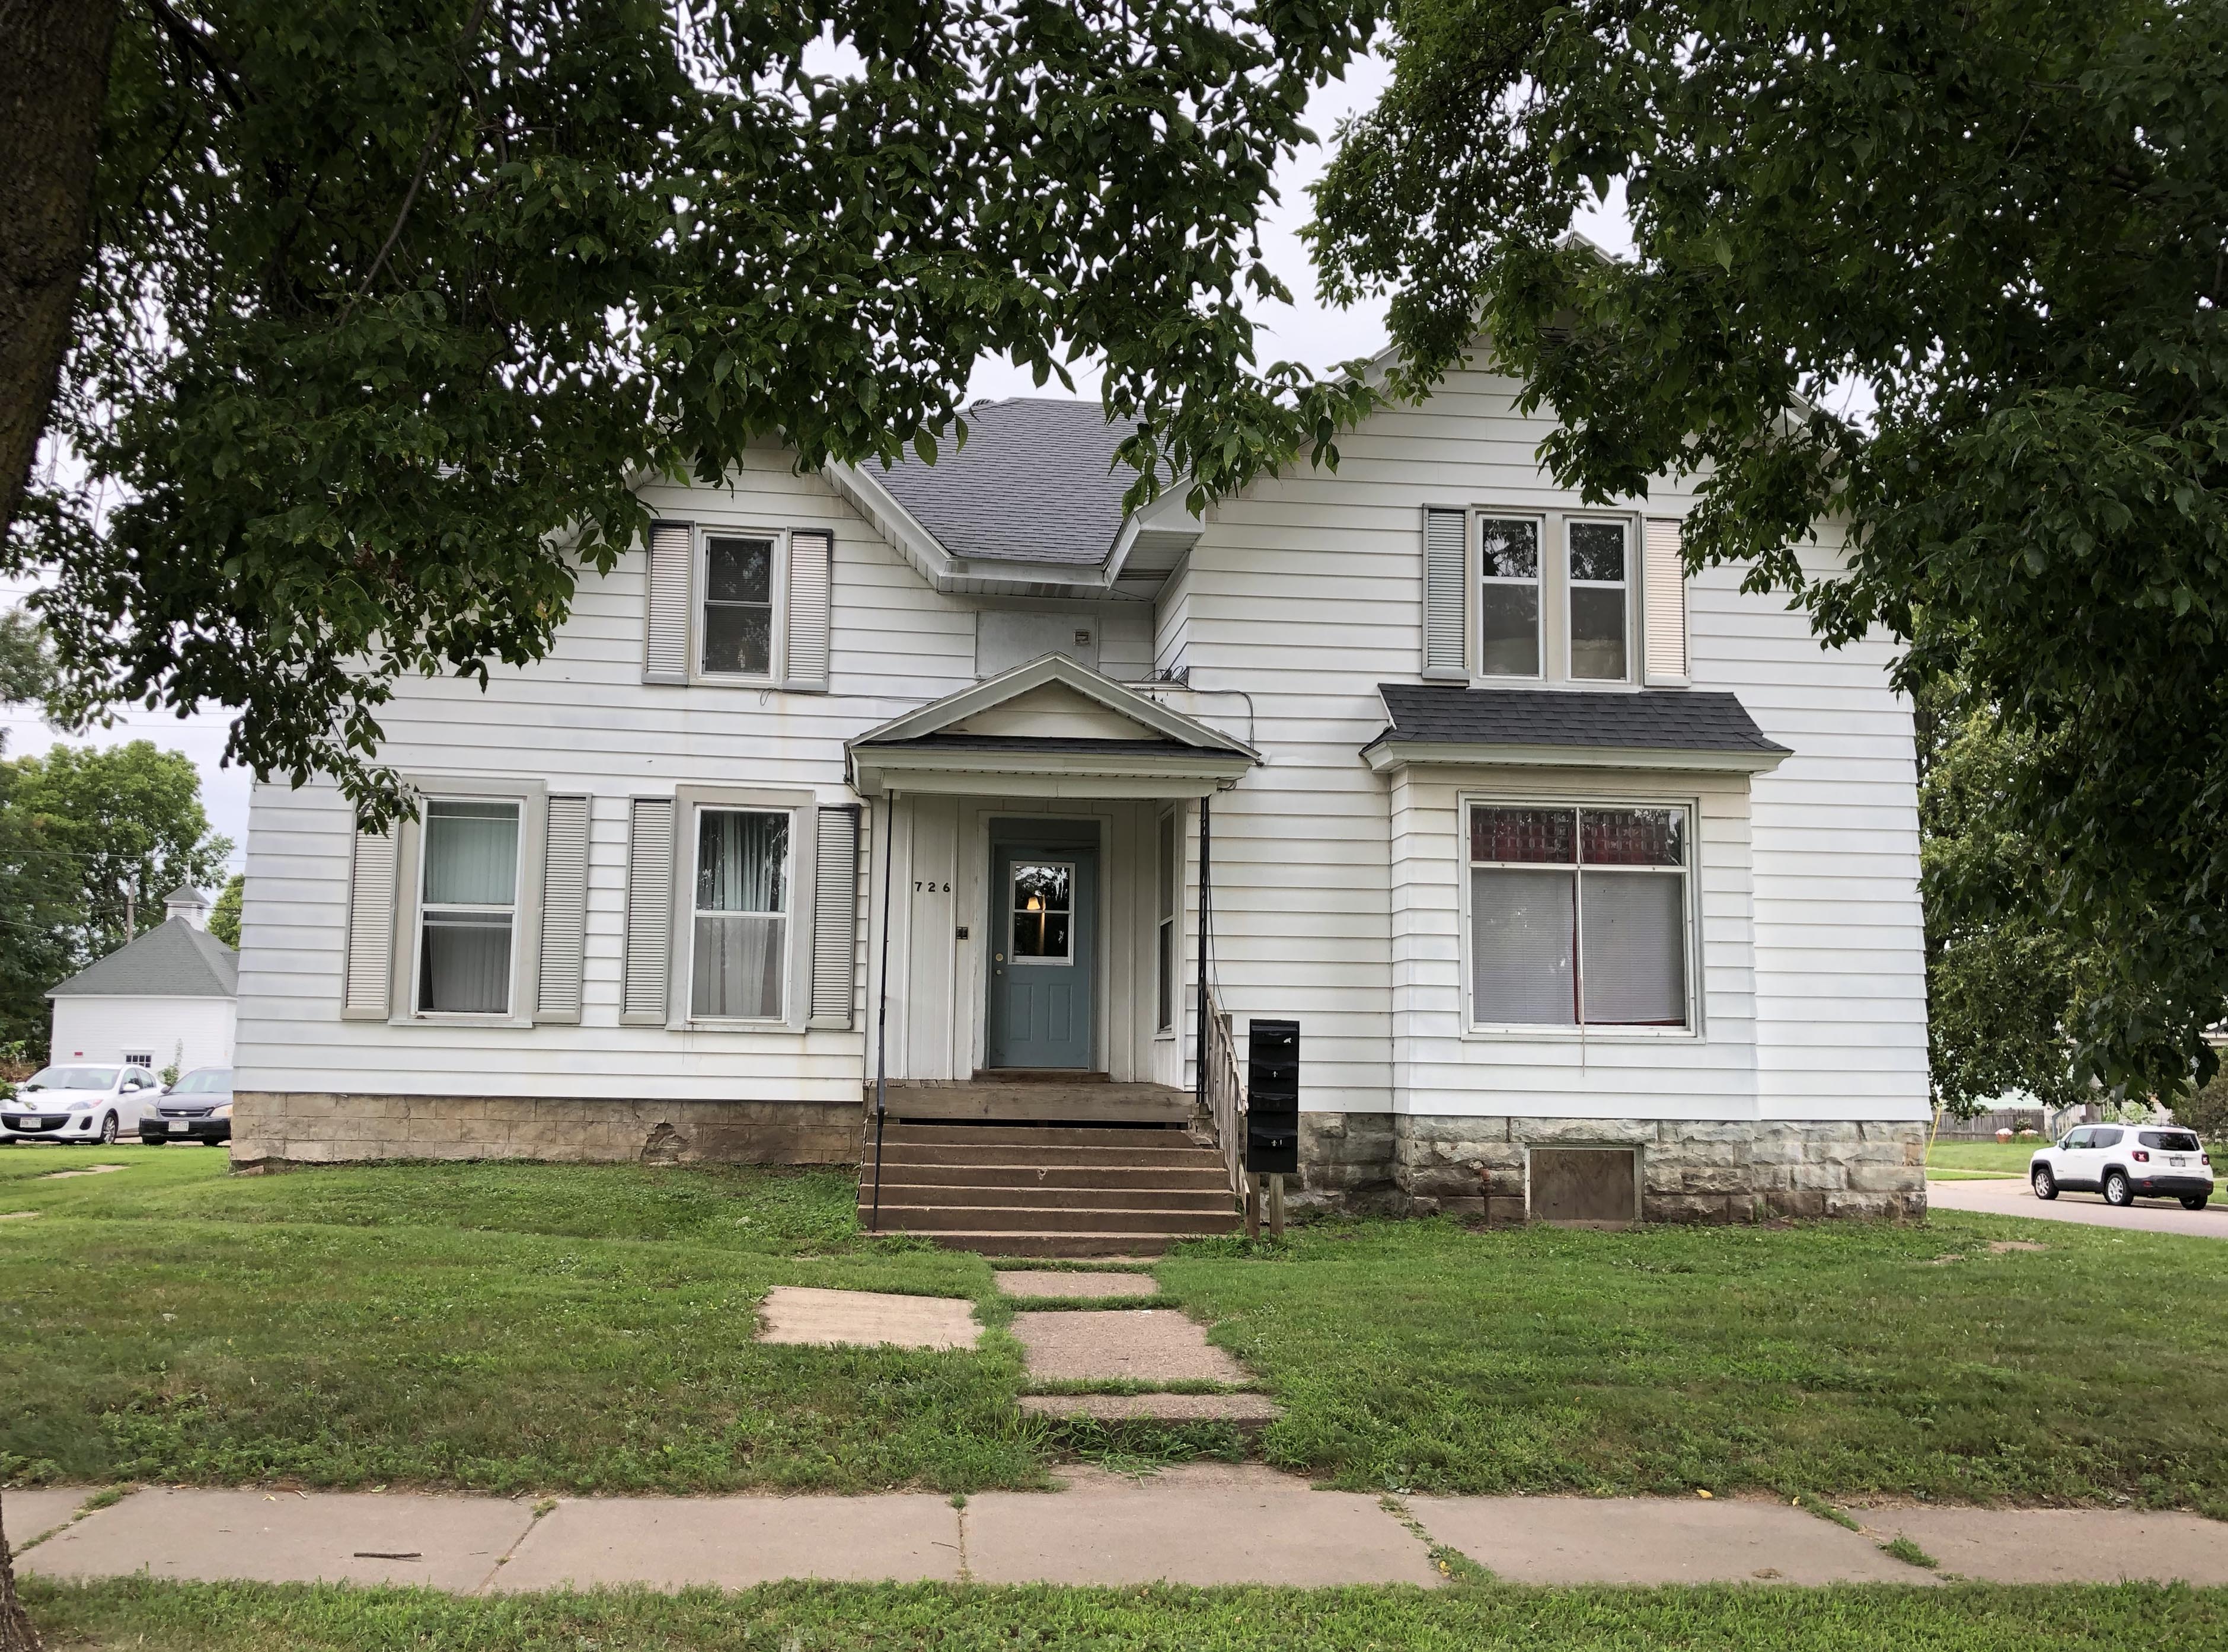 726 5th Ave, Eau Claire, Wisconsin 54703, 2 Bedrooms Bedrooms, ,1 BathroomBathrooms,Multi-Family,Apartment,726 5th Ave,1114